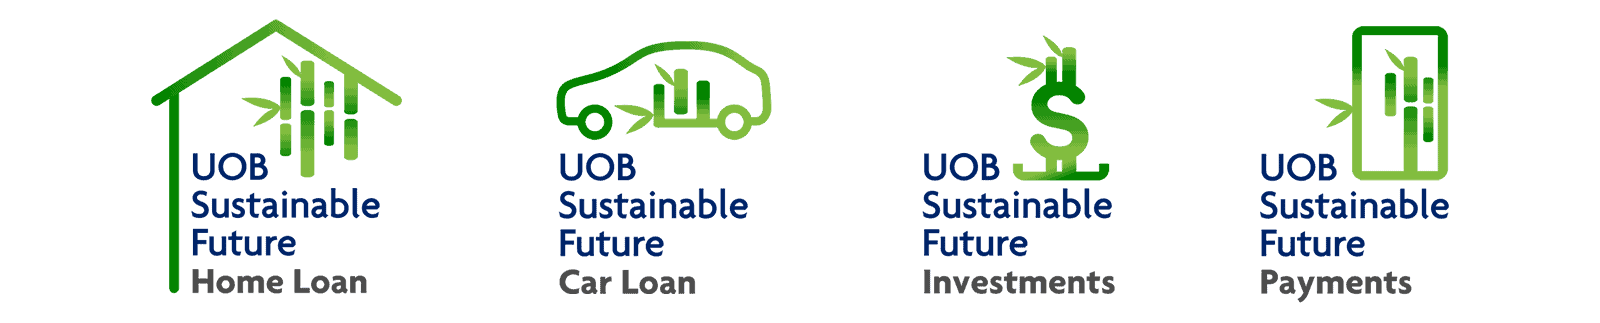 UOB Sustainable Solutions for the Future